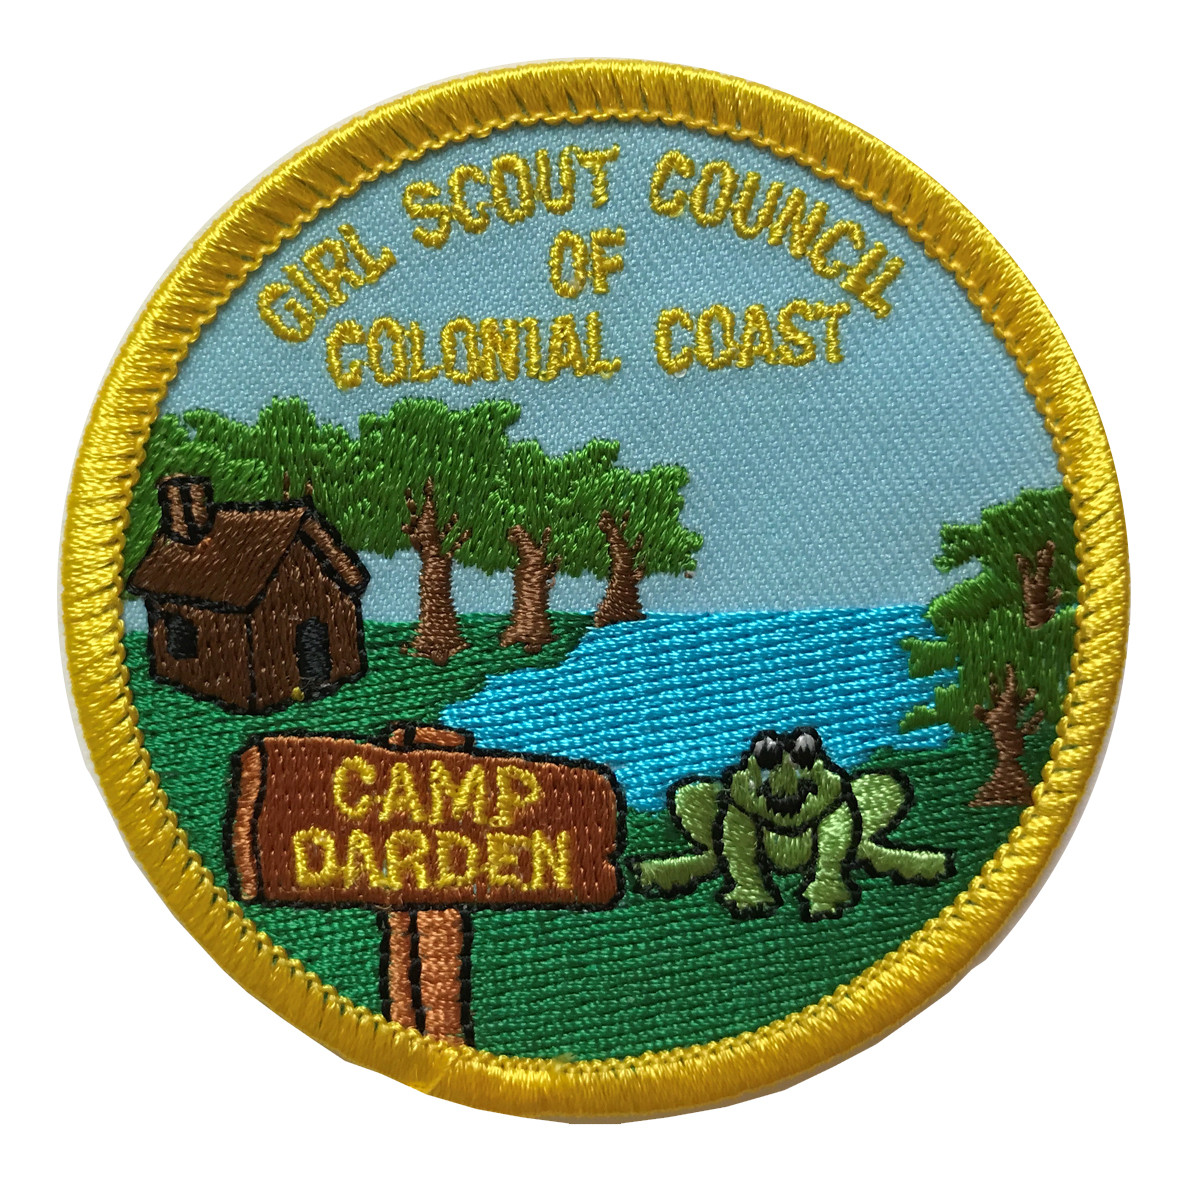 Camp Darden Patch